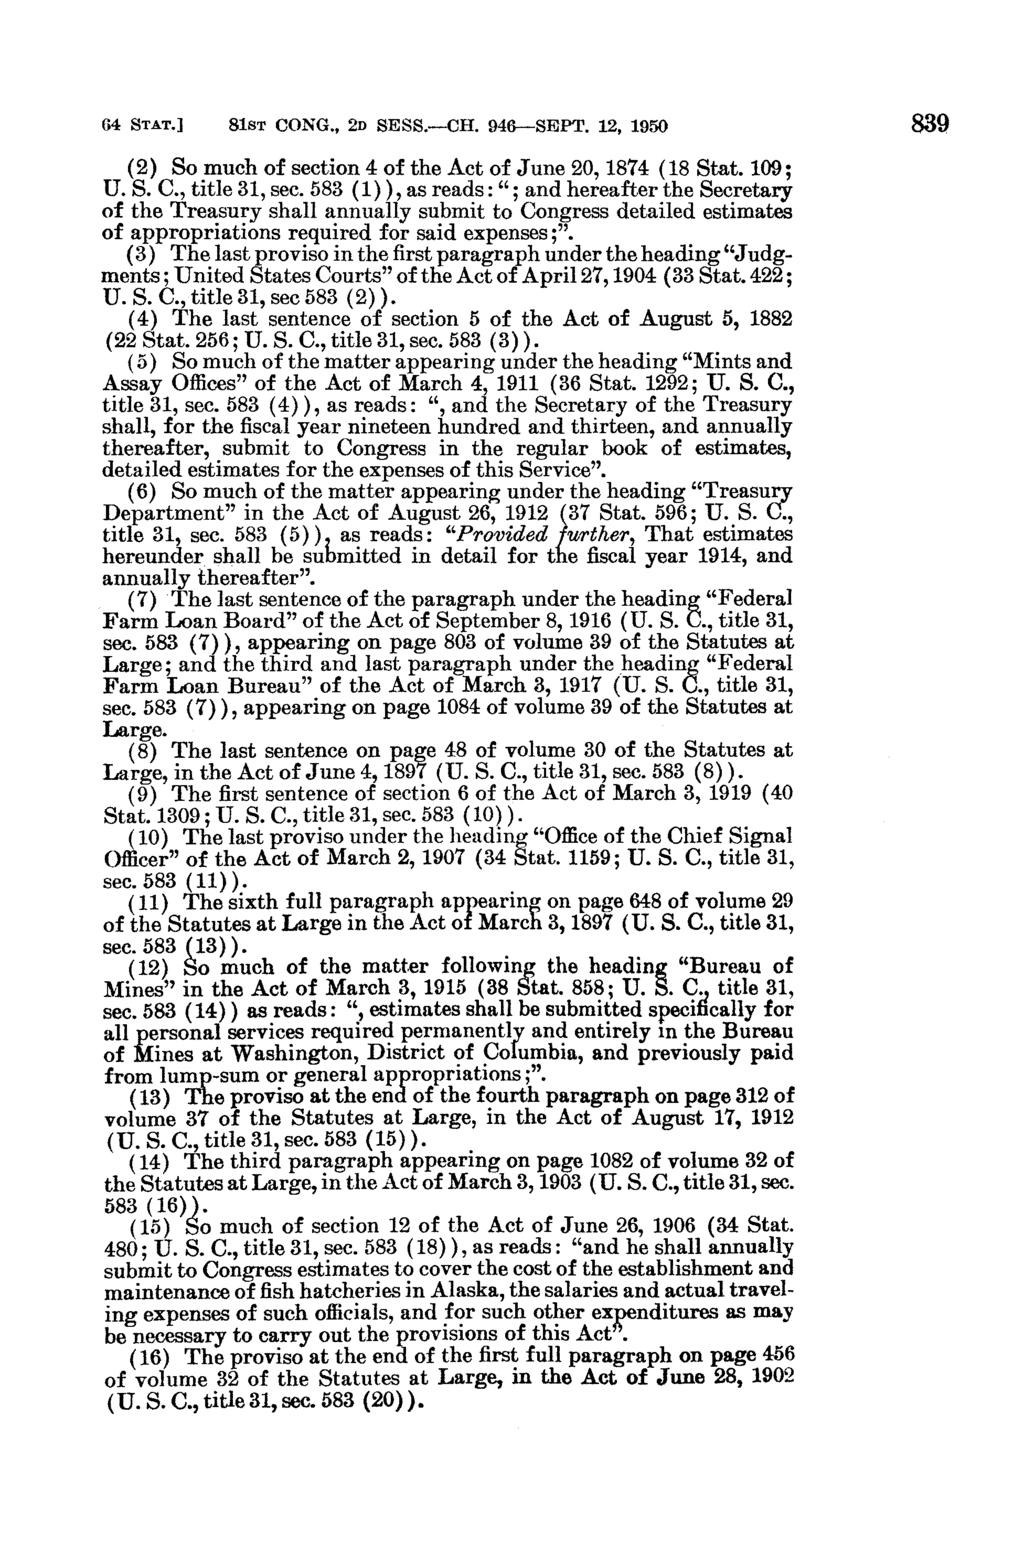 64 STAT.] 81ST CONG., 2D SESS.-CH. 946-SEPT. 12, 1950 (2) So much of section 4 of the Act of June 20, 1874 (18 Stat. 109; U. S. C., title 31, sec.